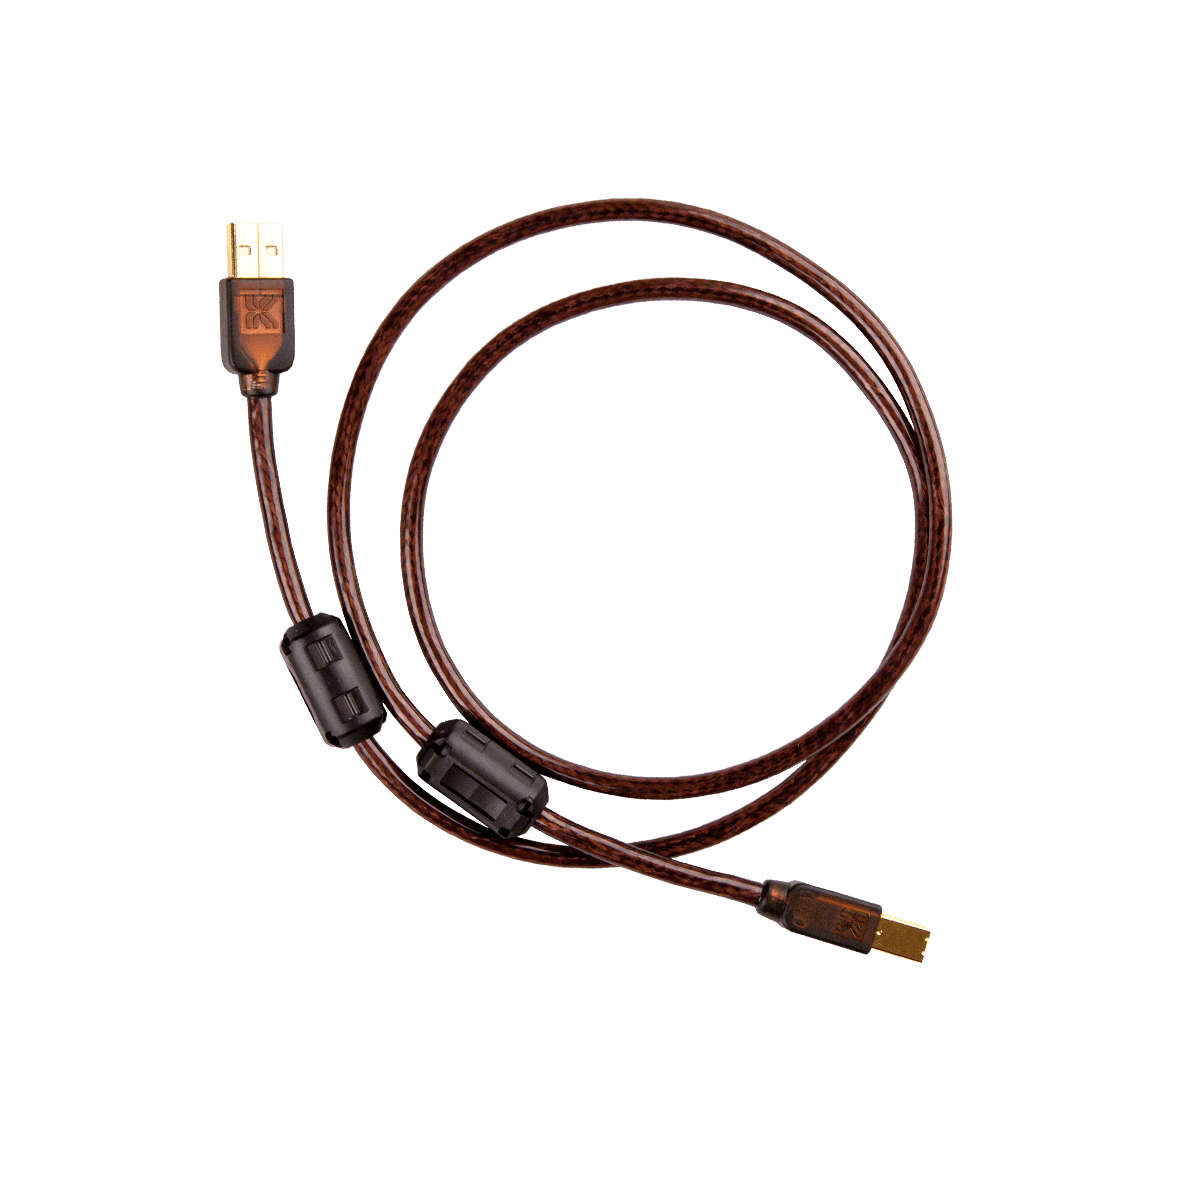 Kimber Kable Base Series BBUS USB Cable (1M /1.5M /2M) - Ooberpad